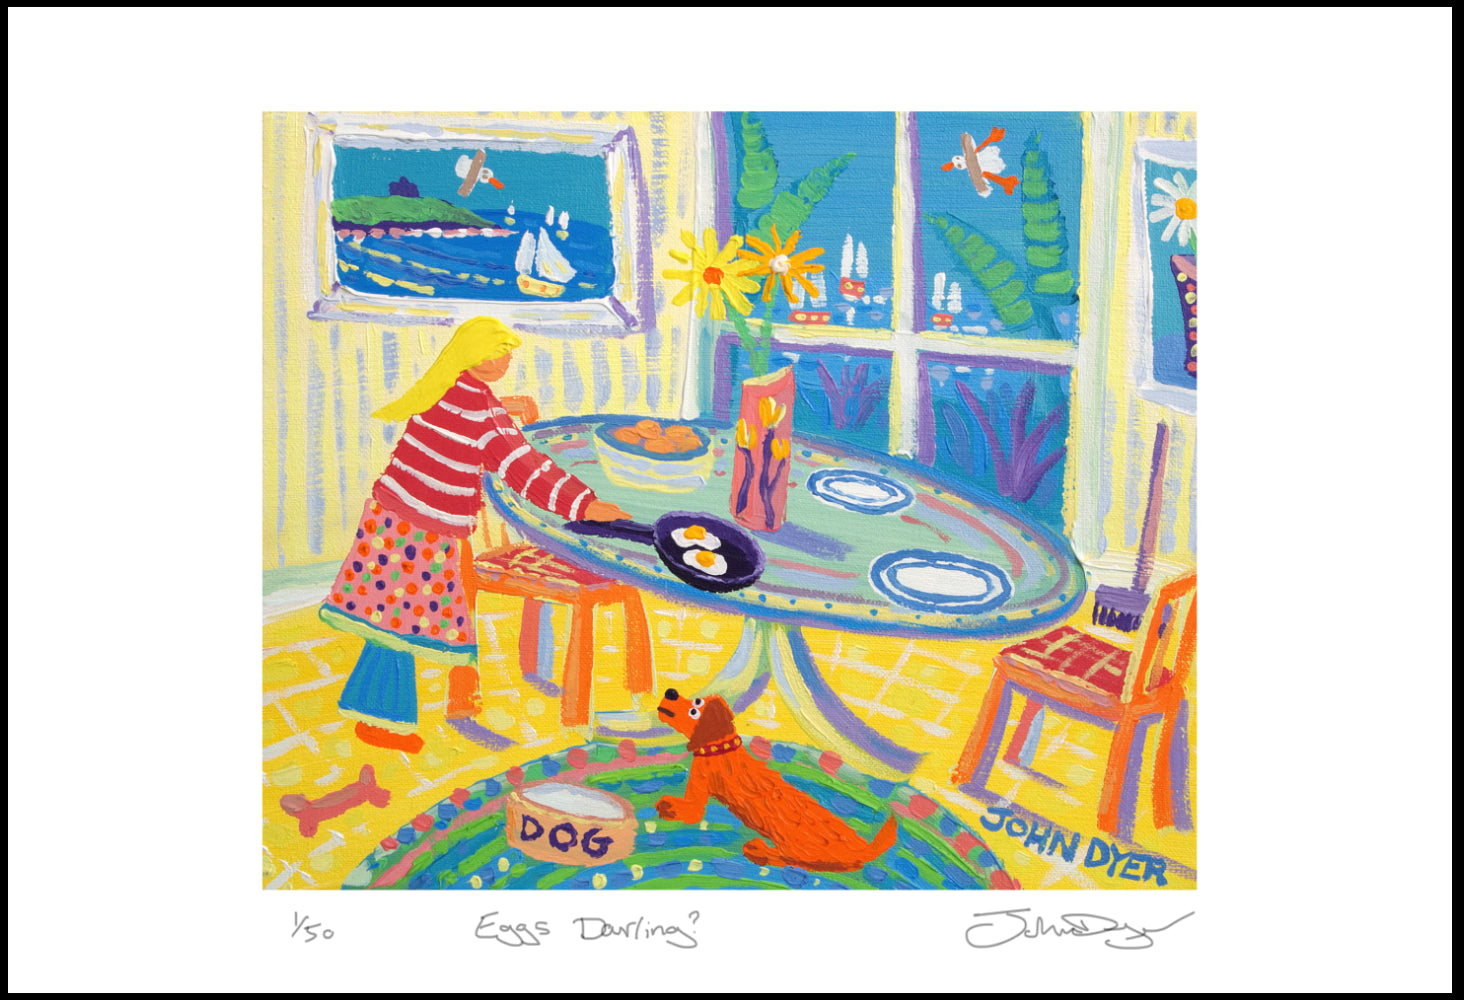 A sausage dog gazes at two fried eggs being cooked for supper. A wonderful art print by Cornish artist John Dyer. Dachsund dog.